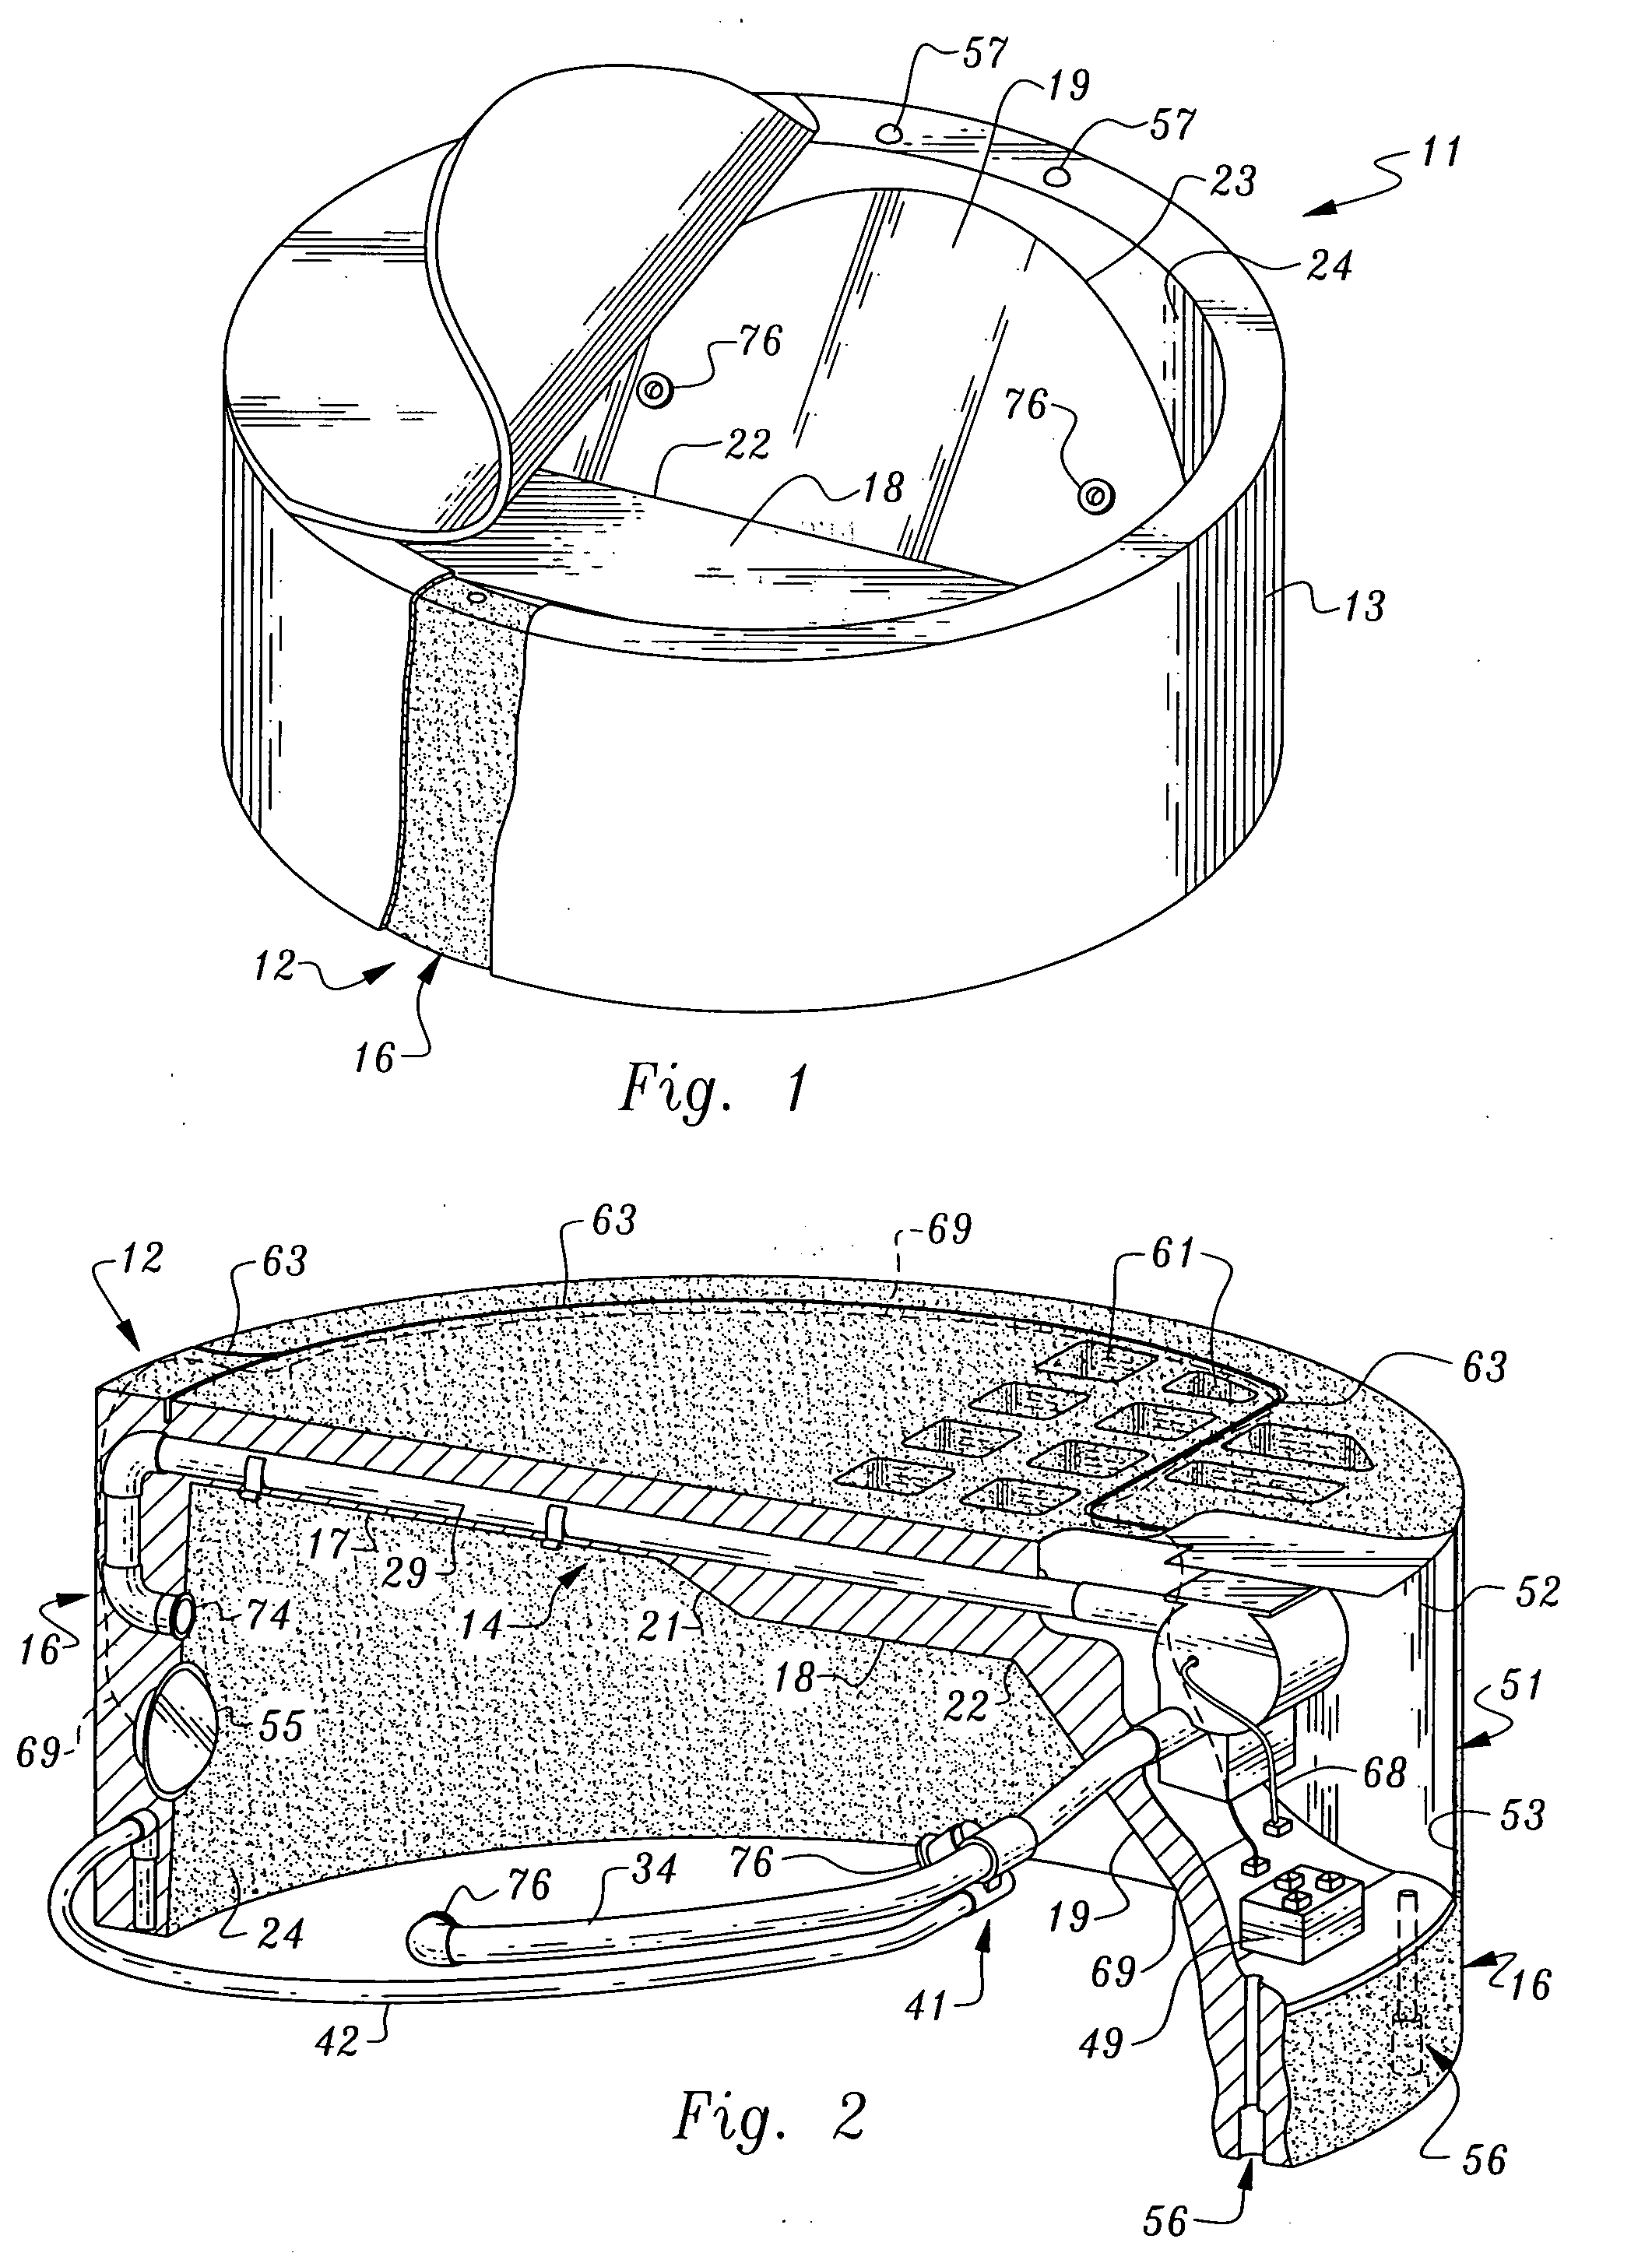 Spa with integrally molded working components and method for making same